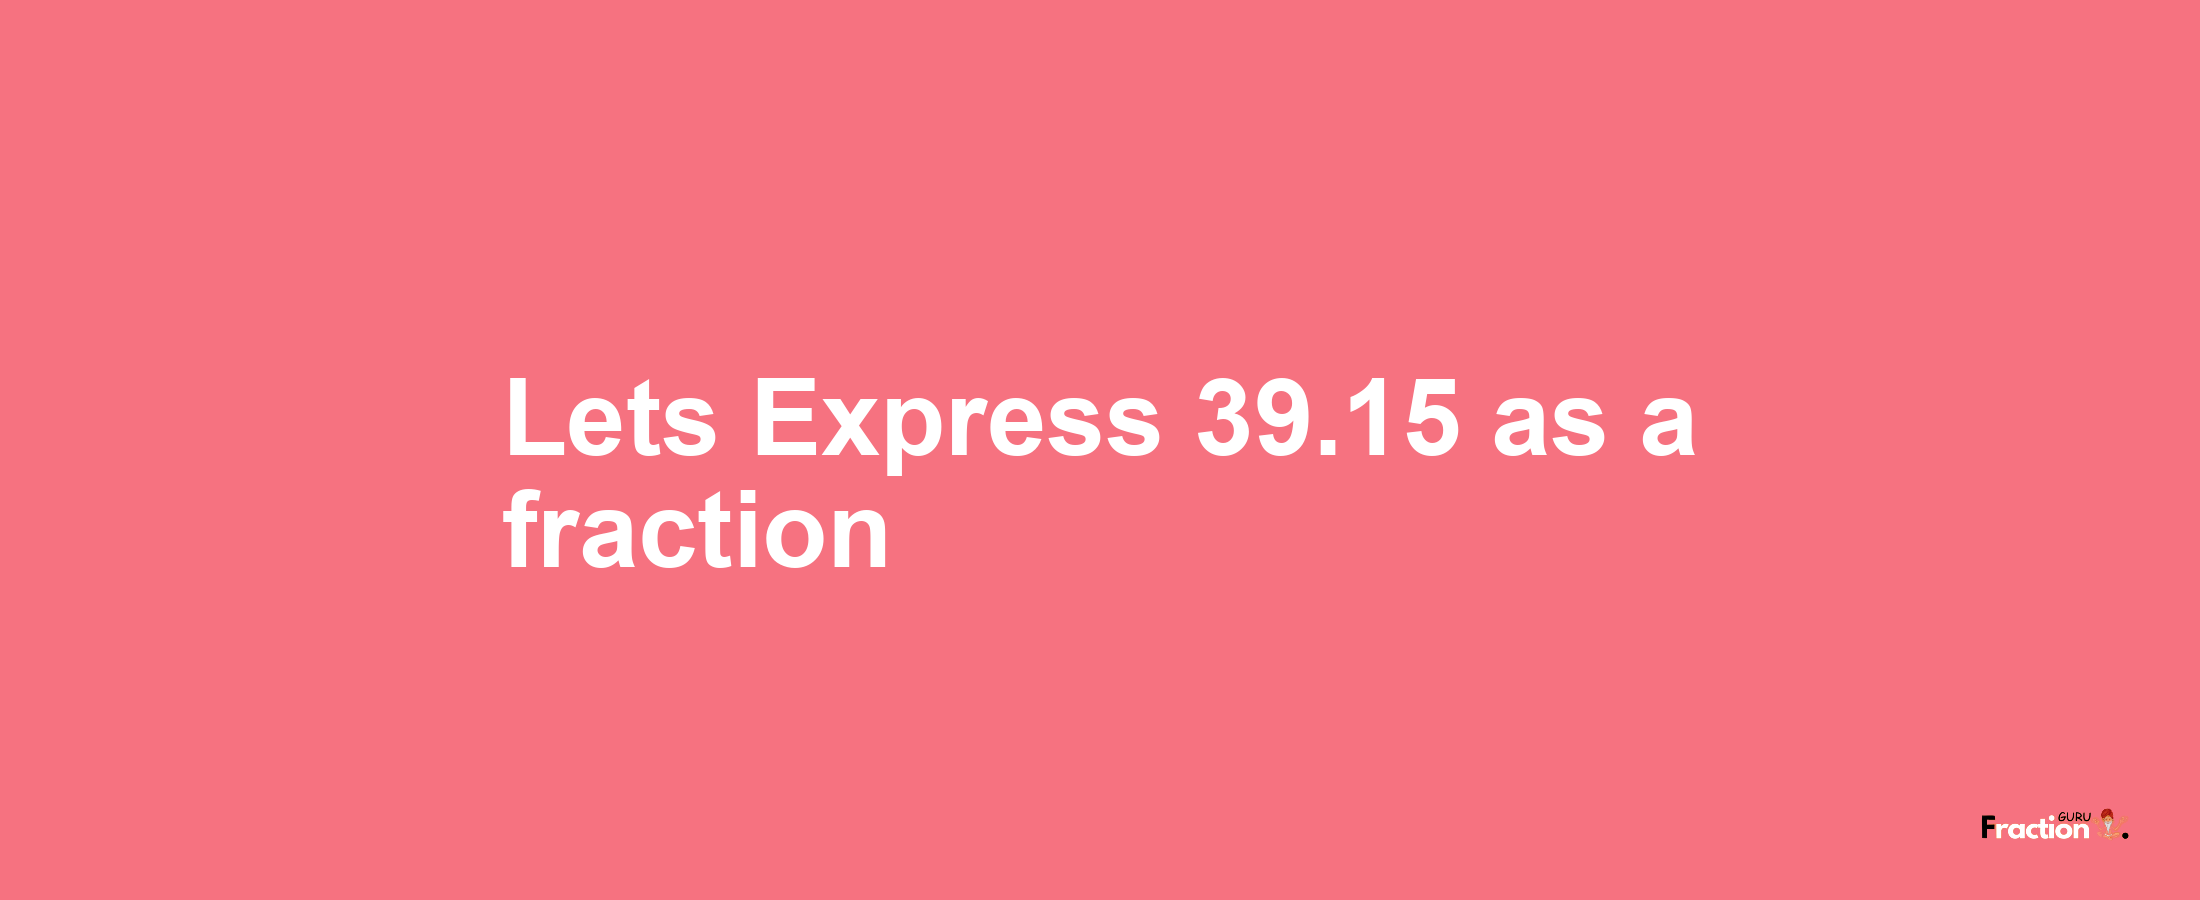 Lets Express 39.15 as afraction